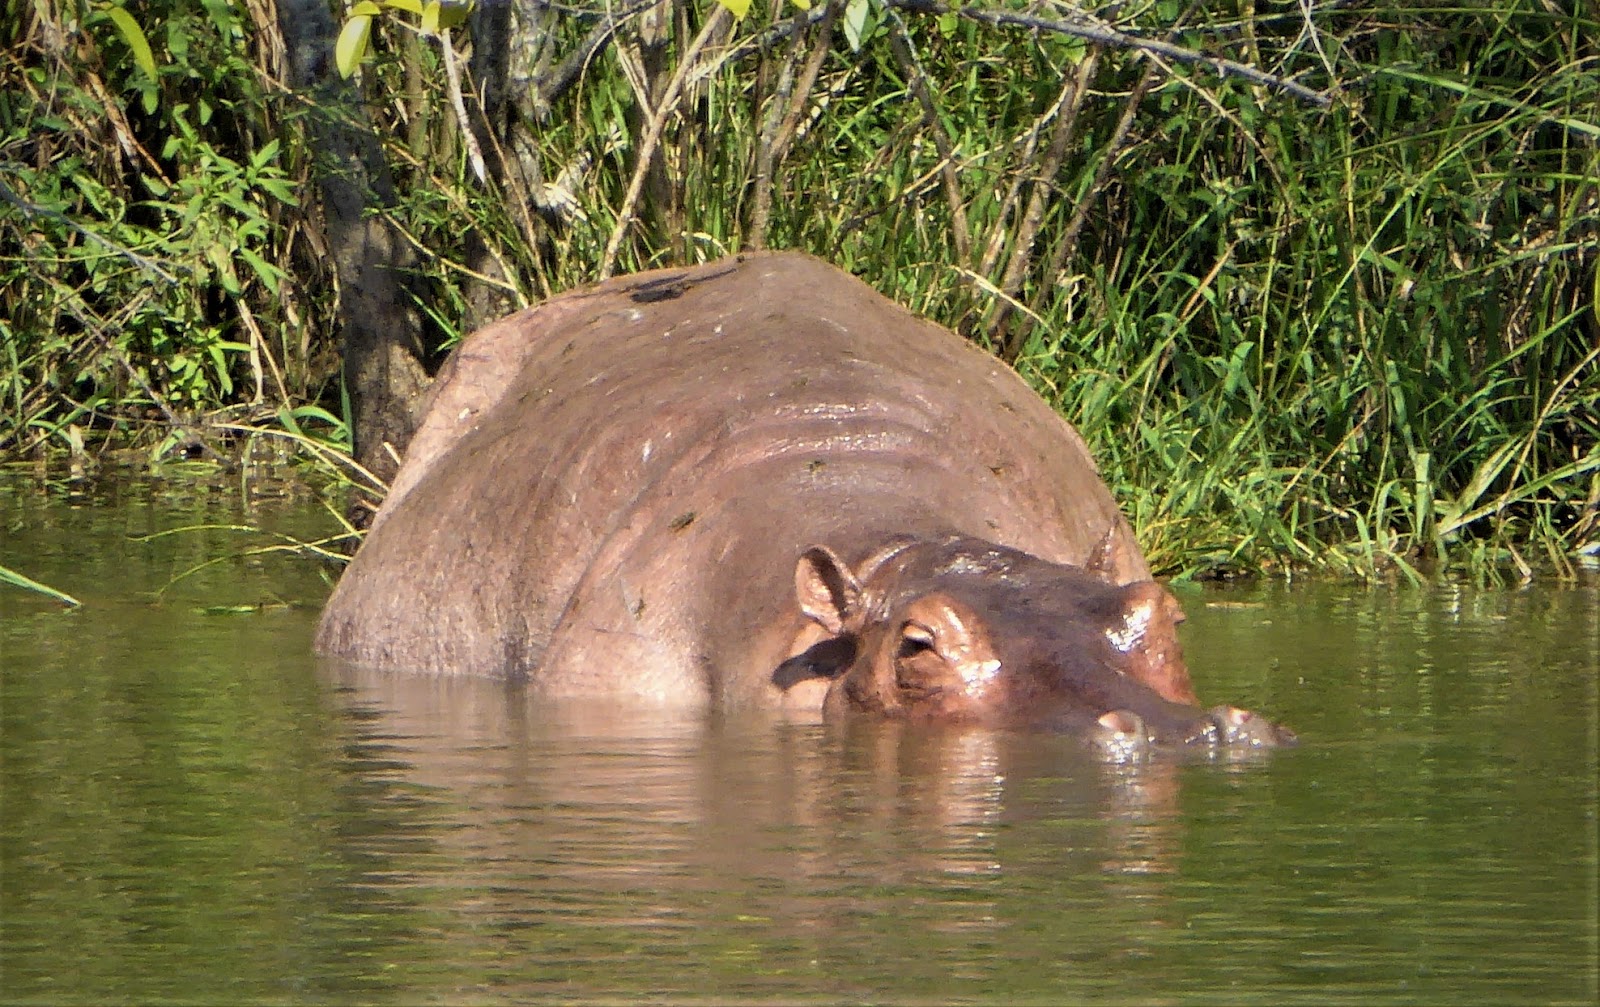 Narcohippo wallowing in river